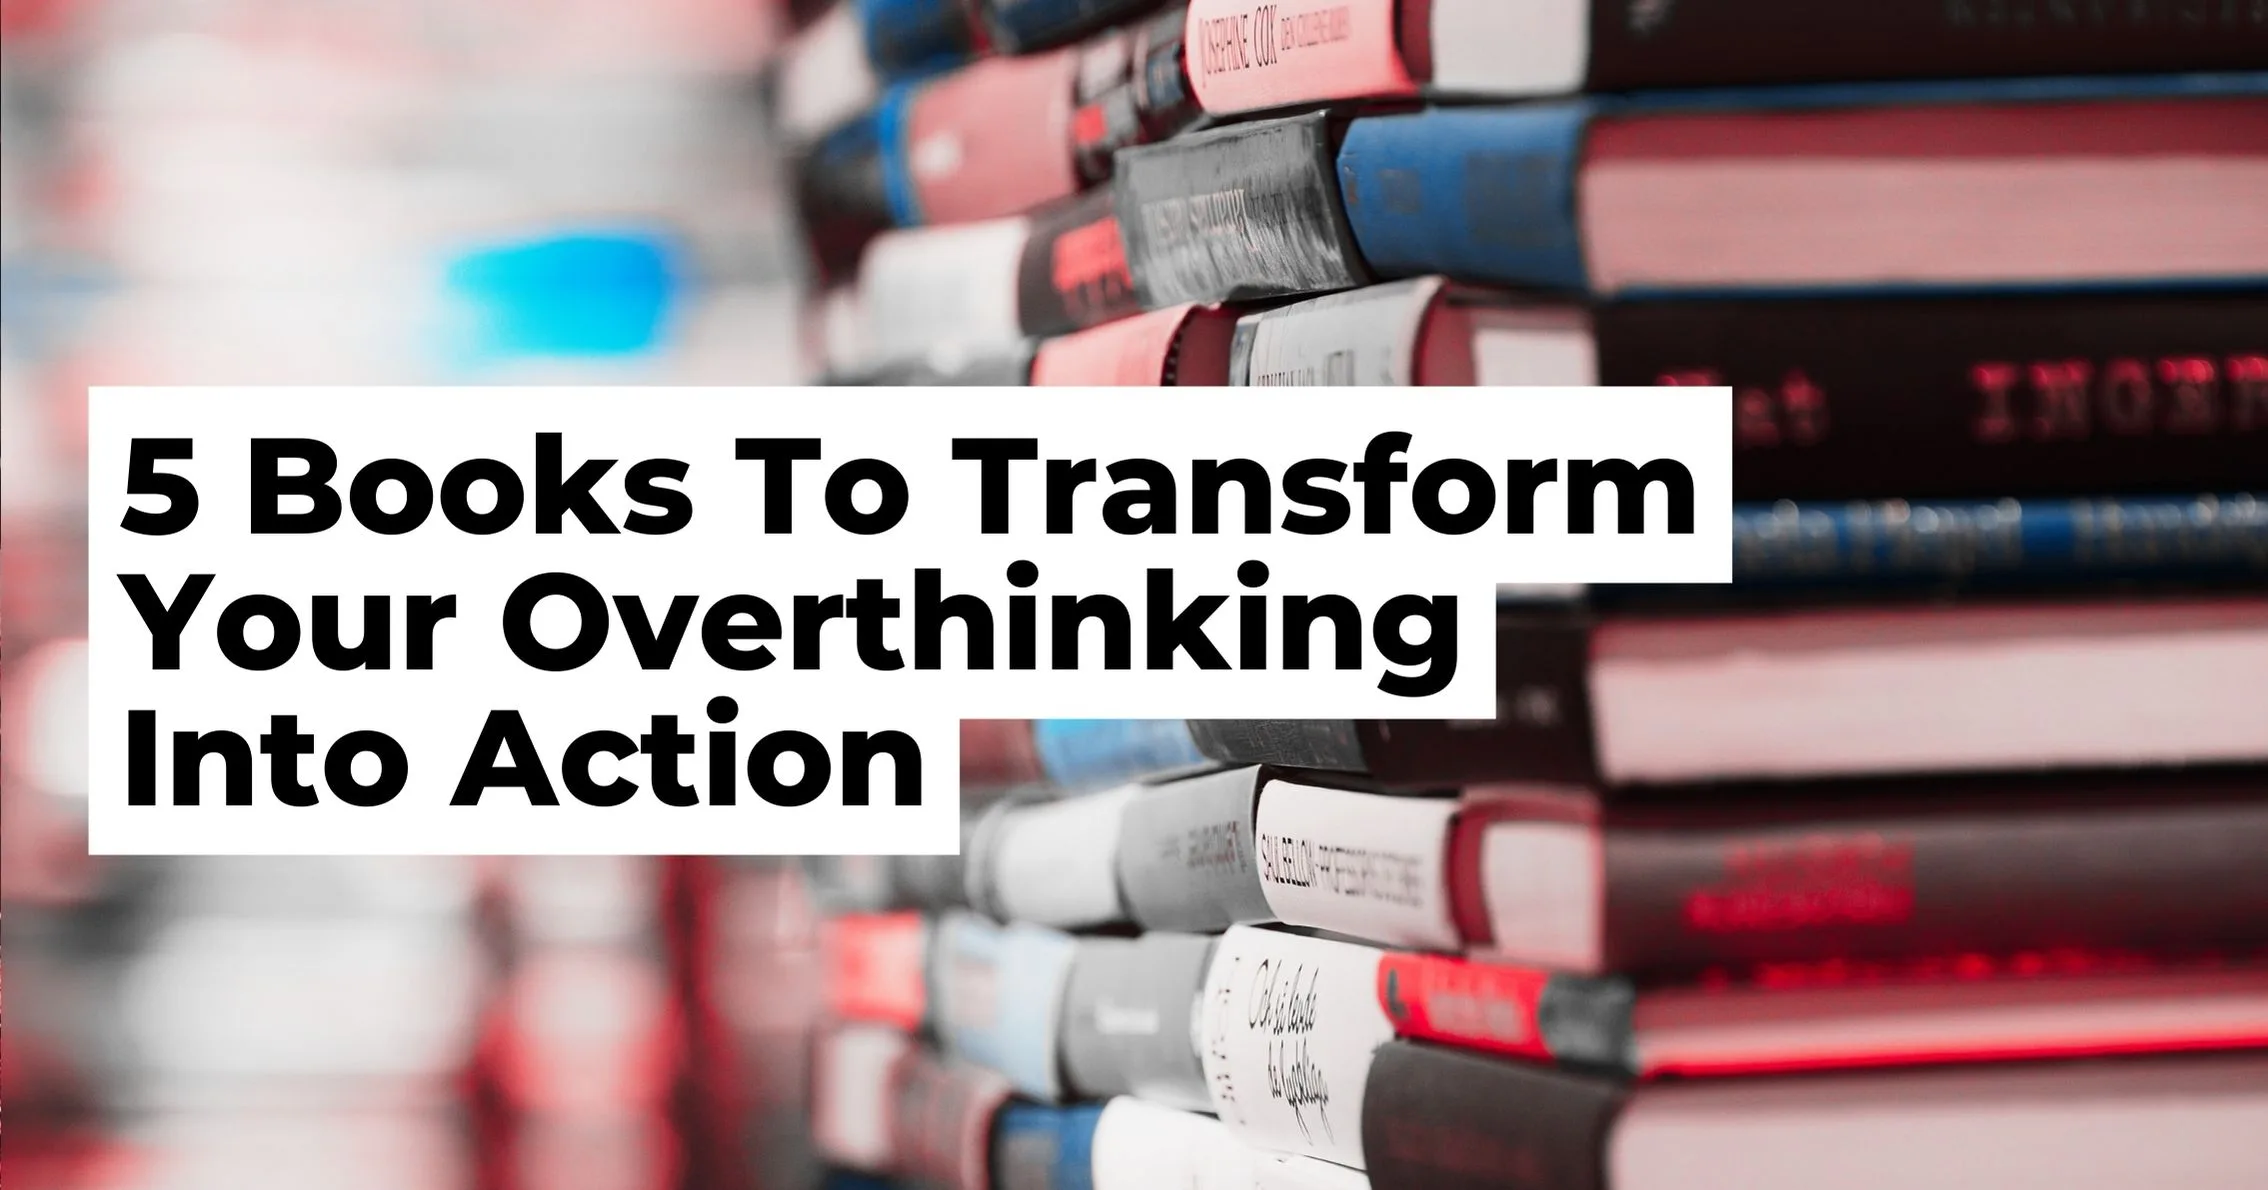 Unlocking the Present: 5 Books That Will Transform Your Overthinking Into Action